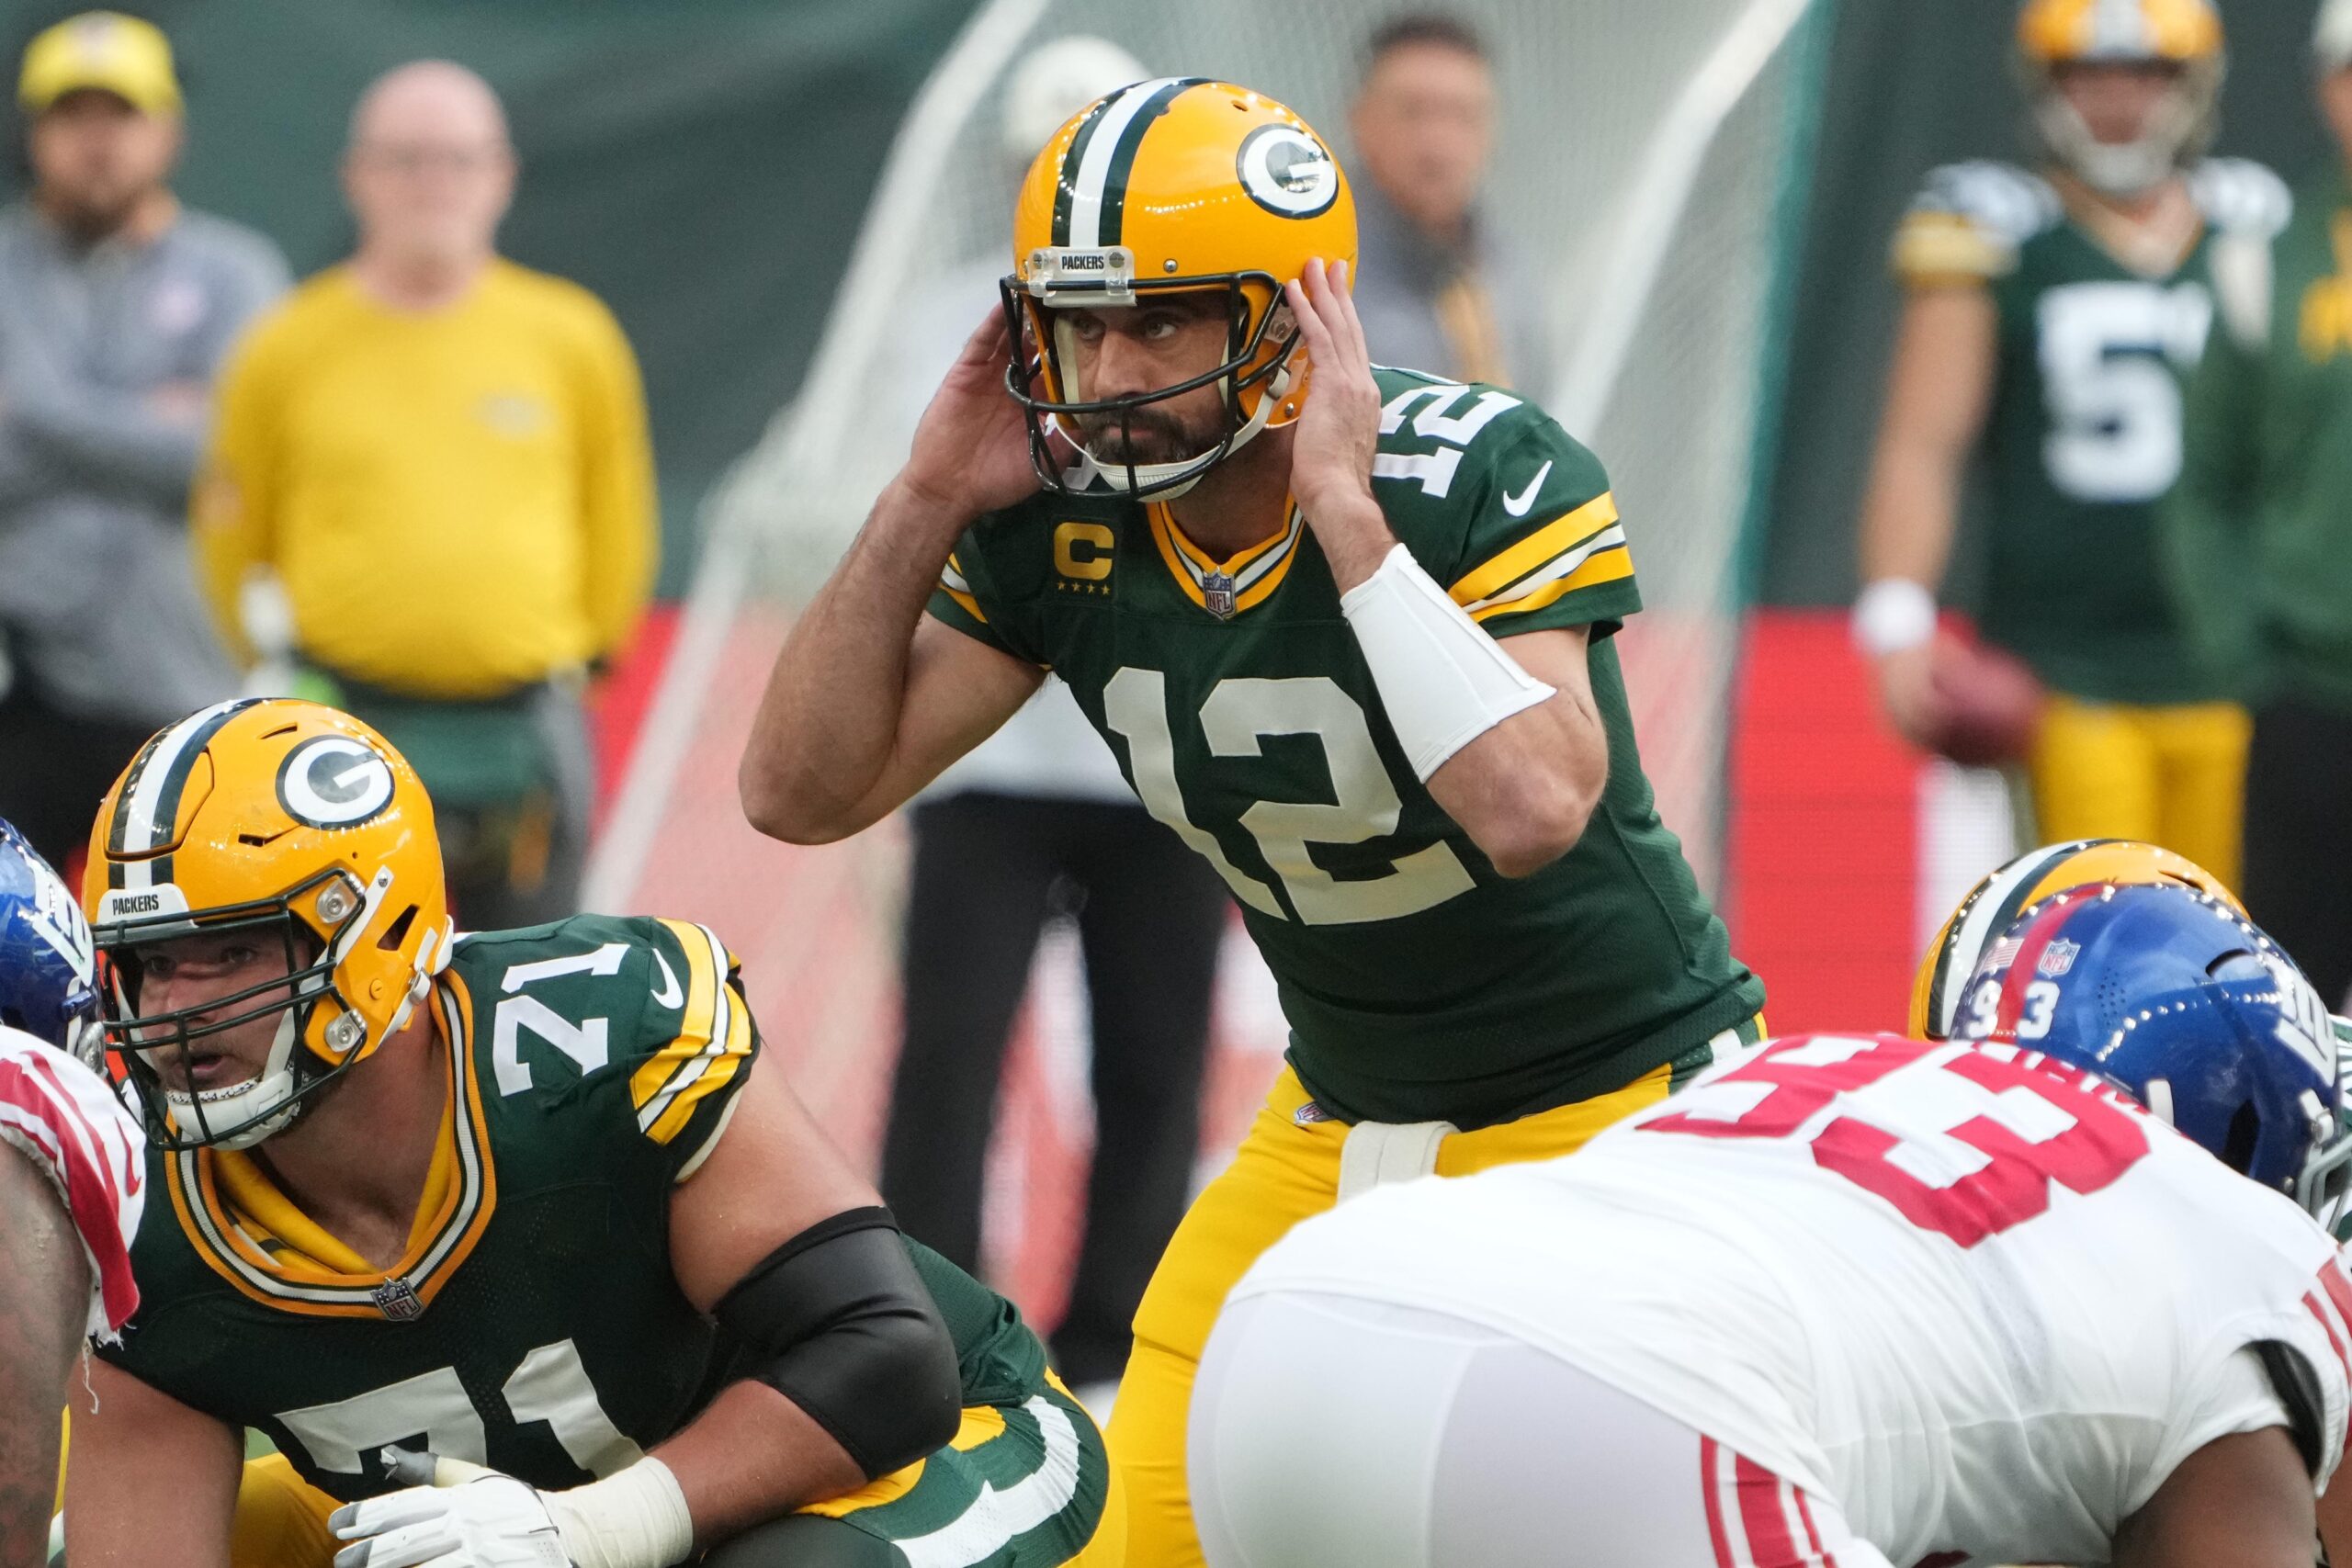 Packers' Aaron Rodgers tweets his amusement over Jets decision 